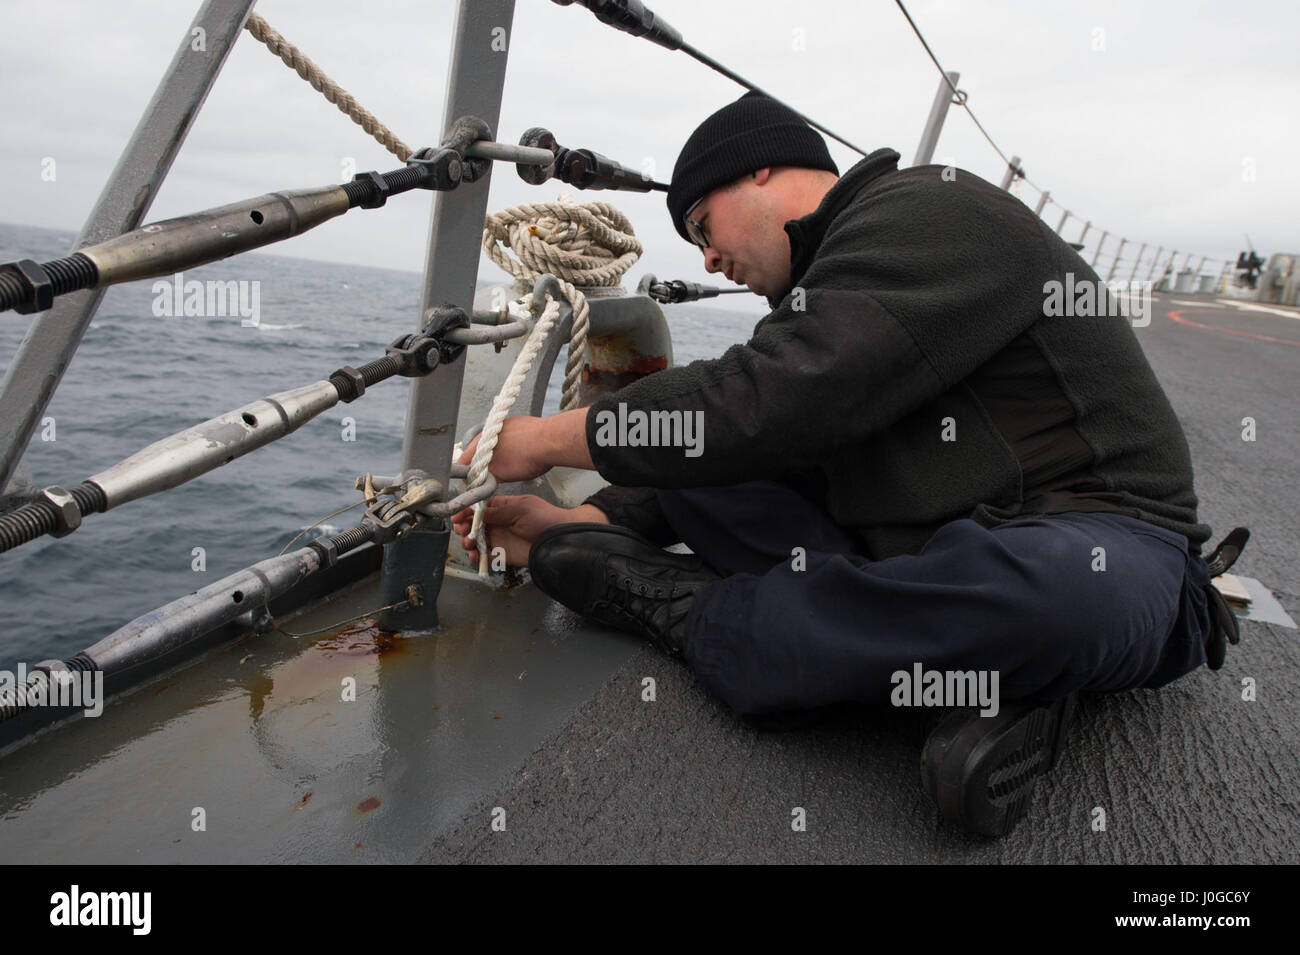 170330-N-ZE250-009   ATLANTIC OCEAN - (March 30, 2017) - Seaman Jason Reese replaces life lines on the forecastle of USS Carney (DDG 64) during exercise Joint Warrior 17-1 March 30, 2017. Carney, an Arleigh Burke-class guided-missile destroyer, forward-deployed to Rota, Spain, is conducting its third patrol in the U.S. 6th Fleet area of operations in support of U.S. national security interests in Europe. (U.S. Navy photo by Mass Communication Specialist 3rd Class Weston Jones/Released) Stock Photo